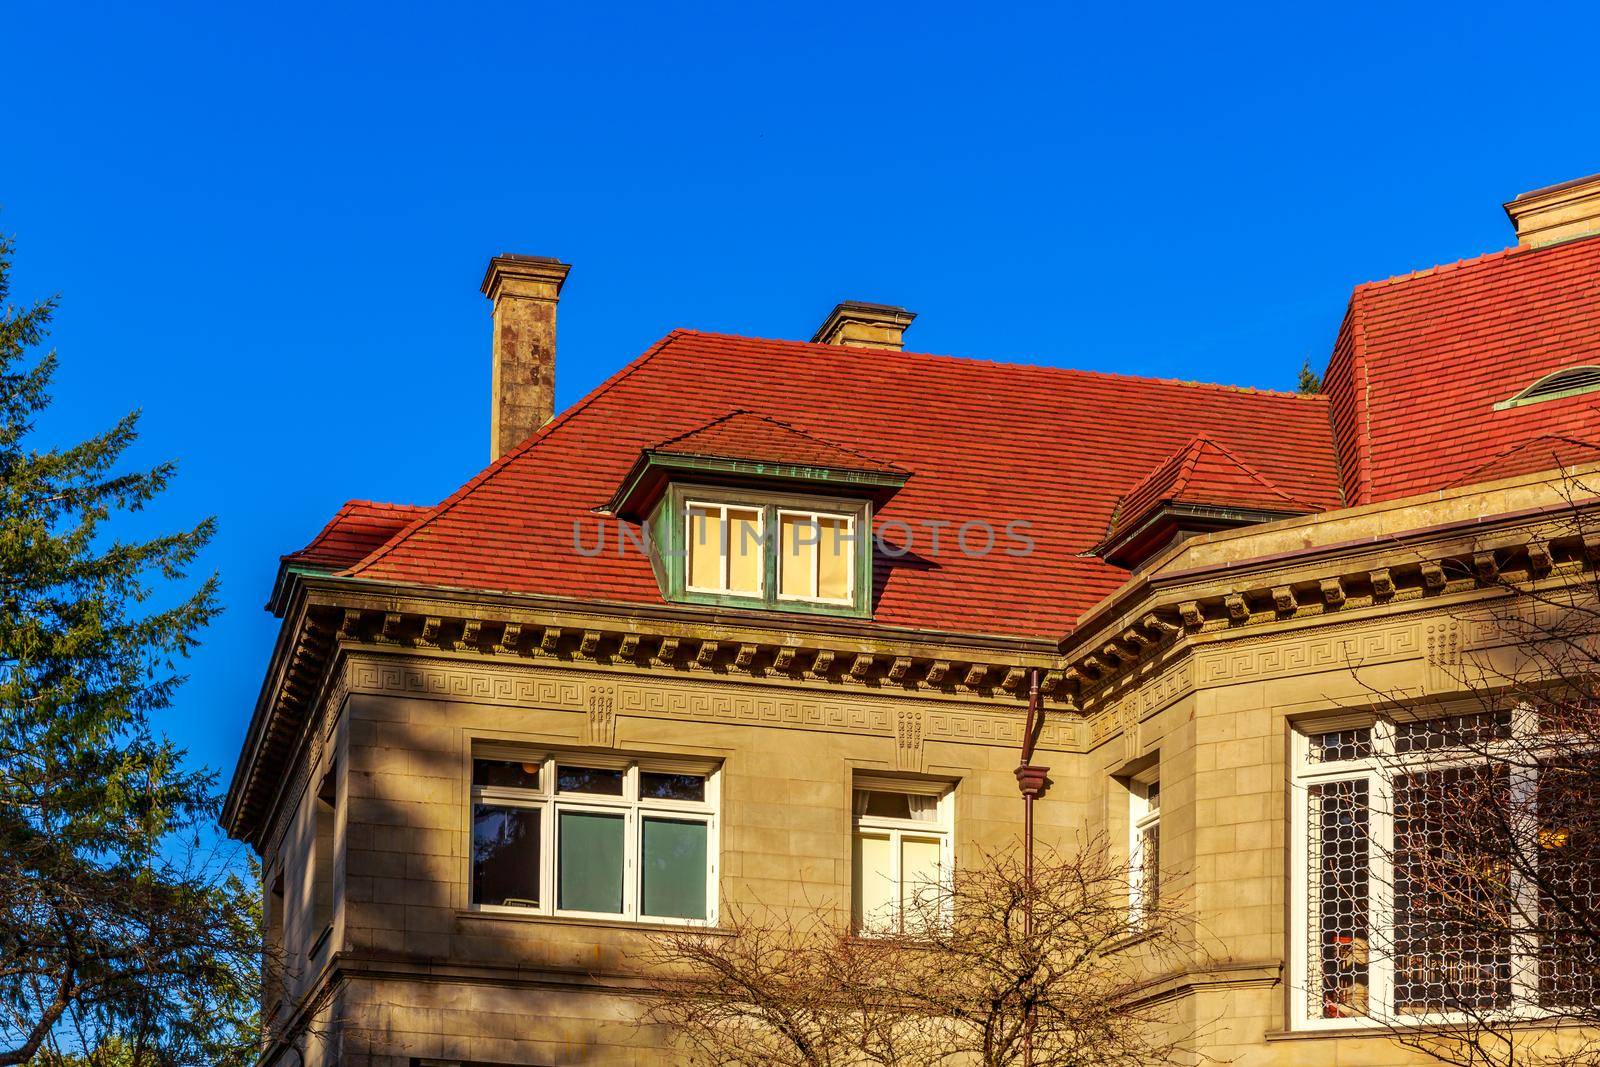 Portland Pittock Mansion by gepeng